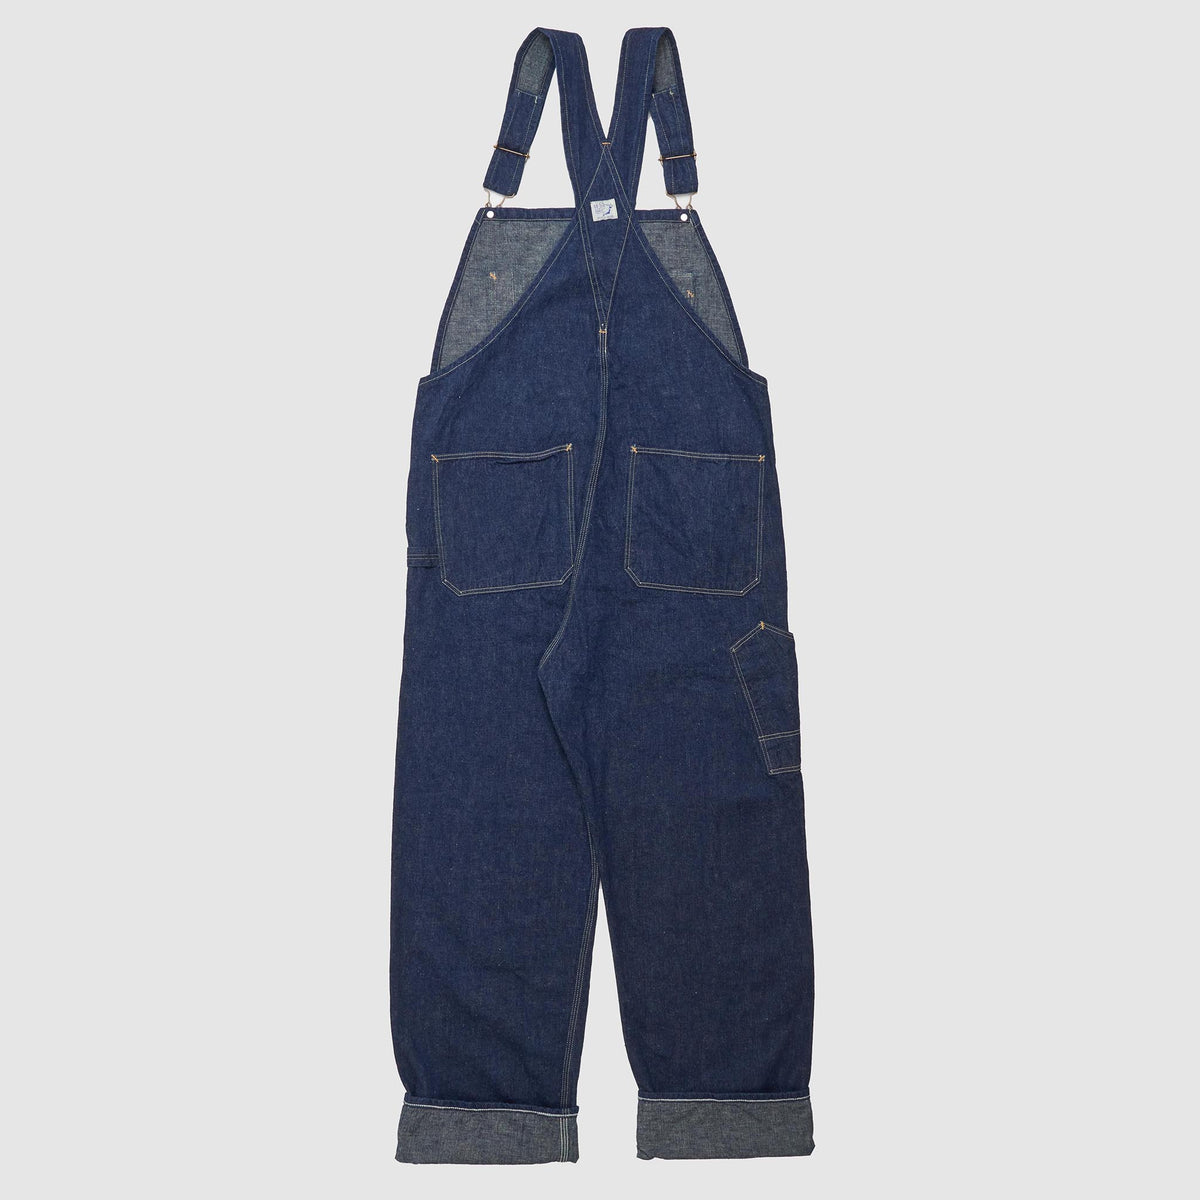 OrSlow Overall Dungarees Denim